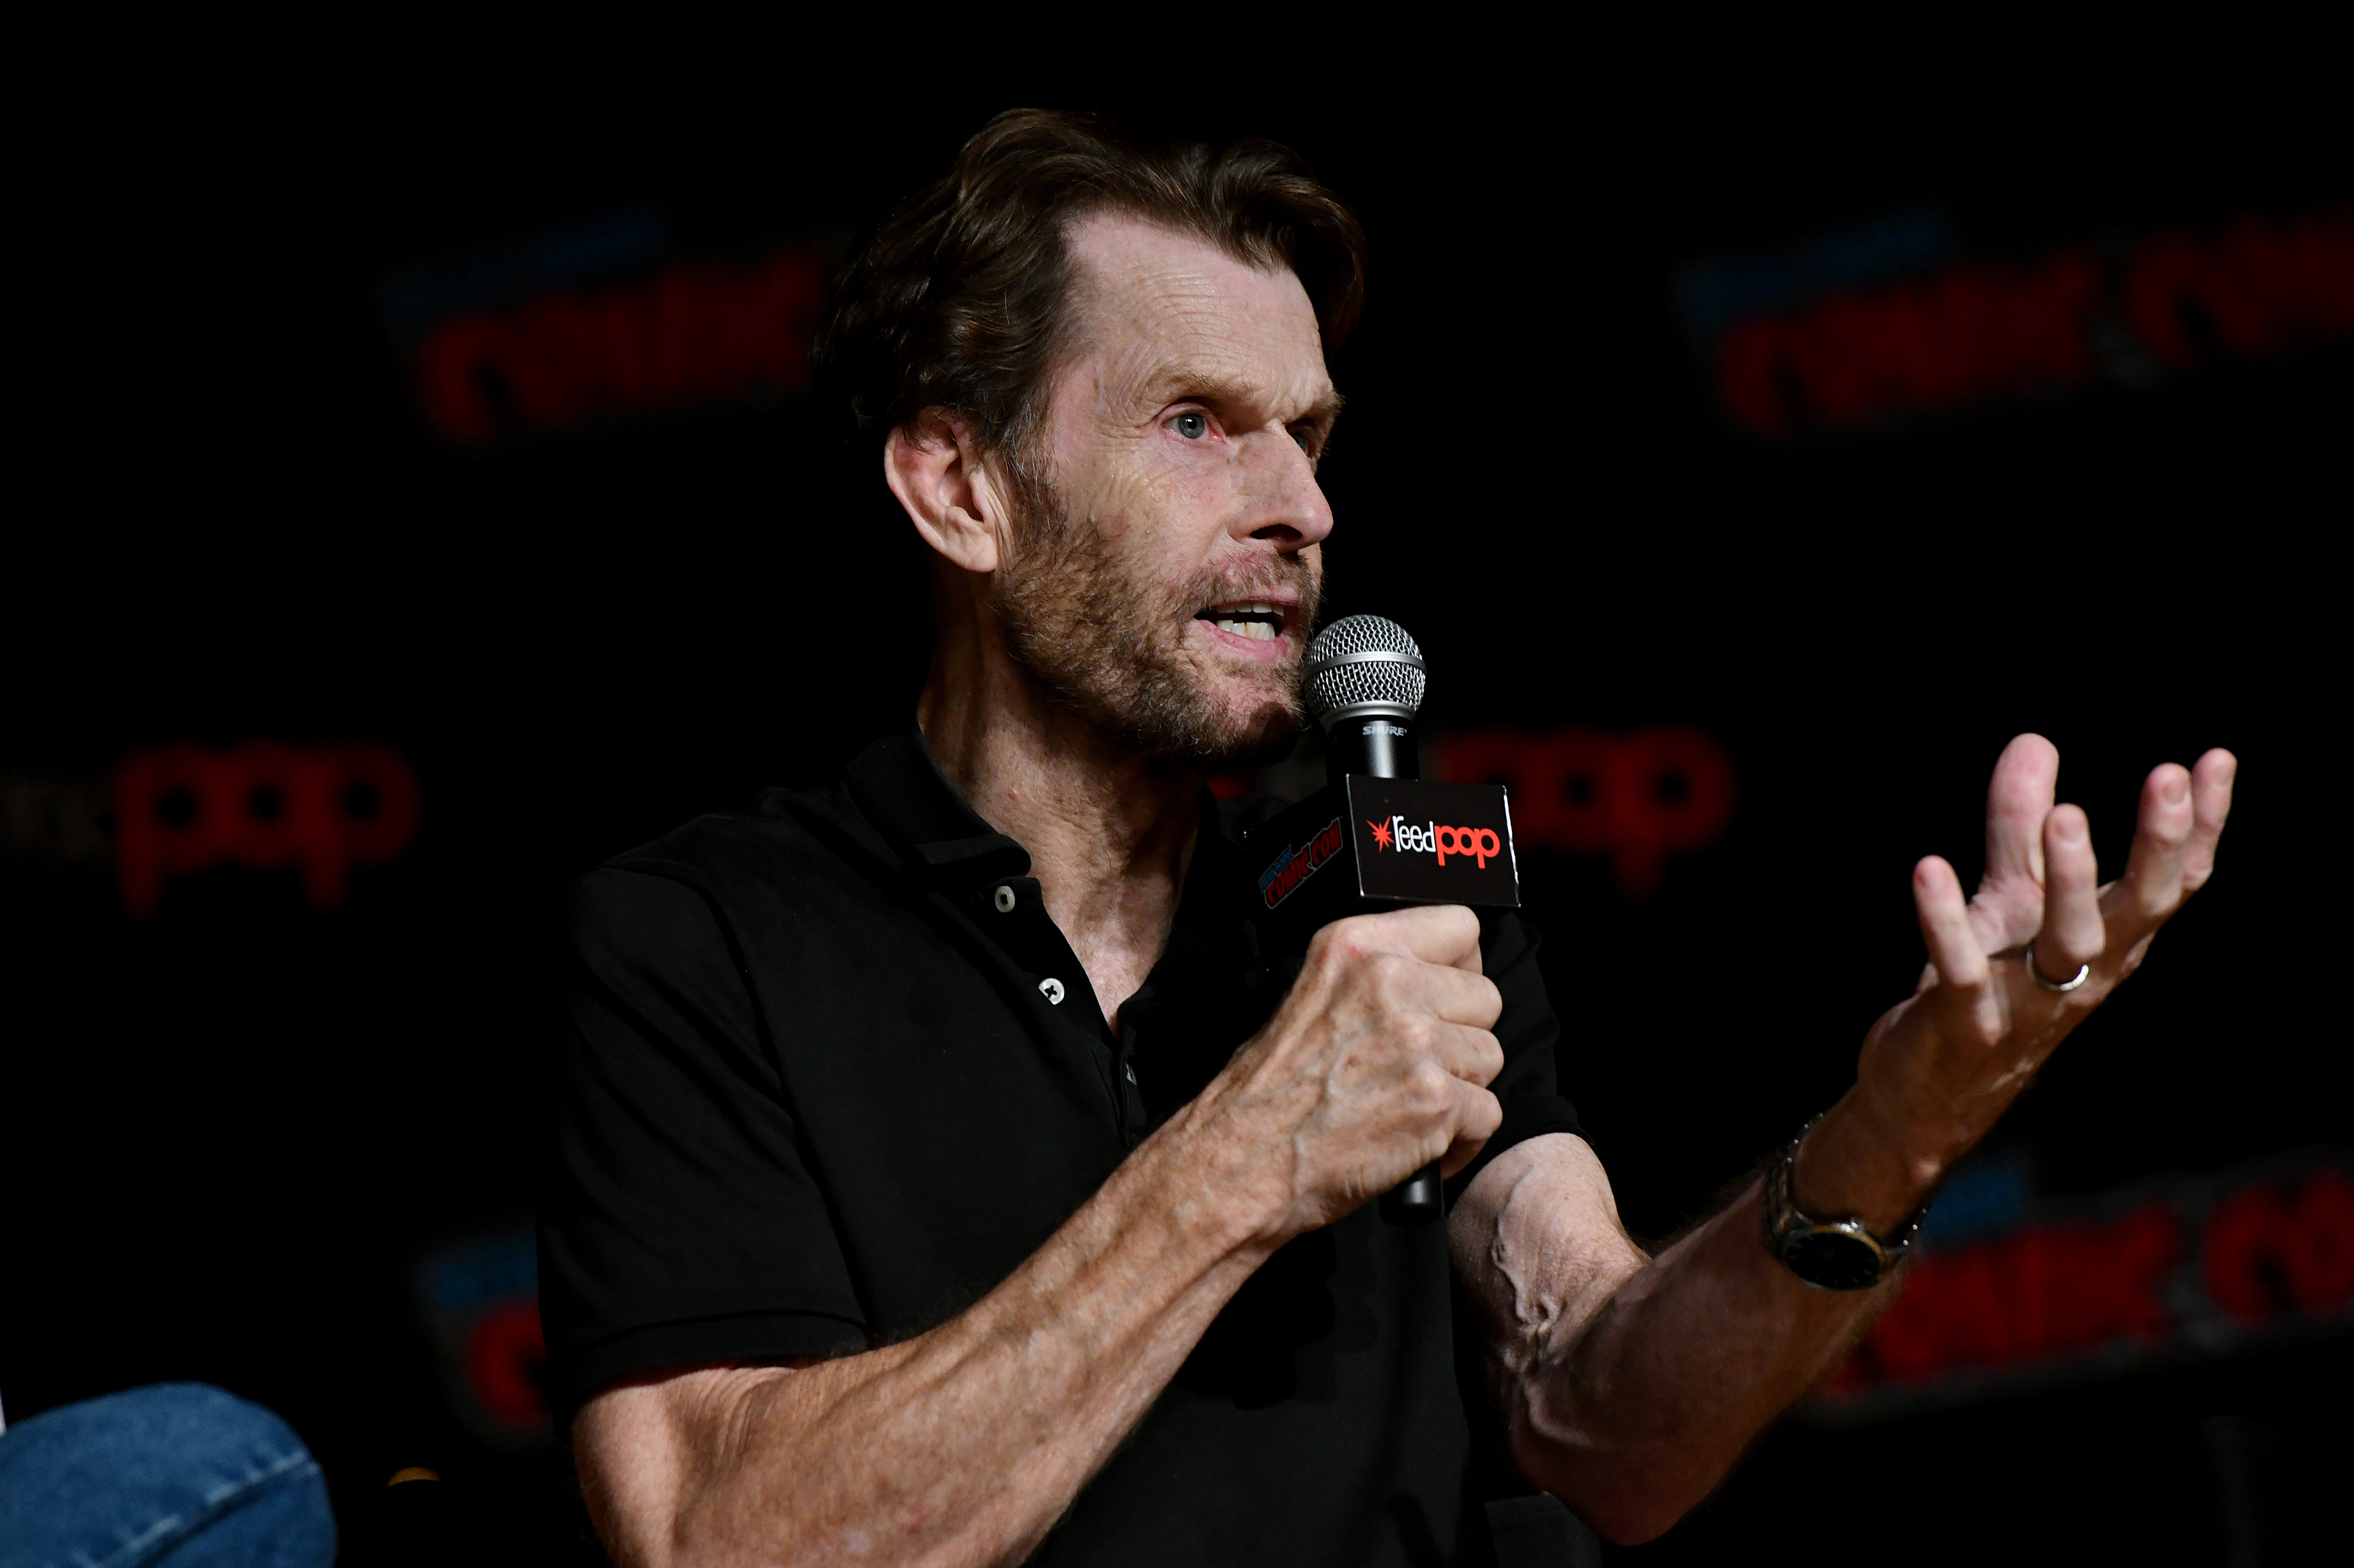 Voice actor Kevin Conroy speaks on stage during the Batman Beyond 20th Anniversary at New York Comic Con 2019